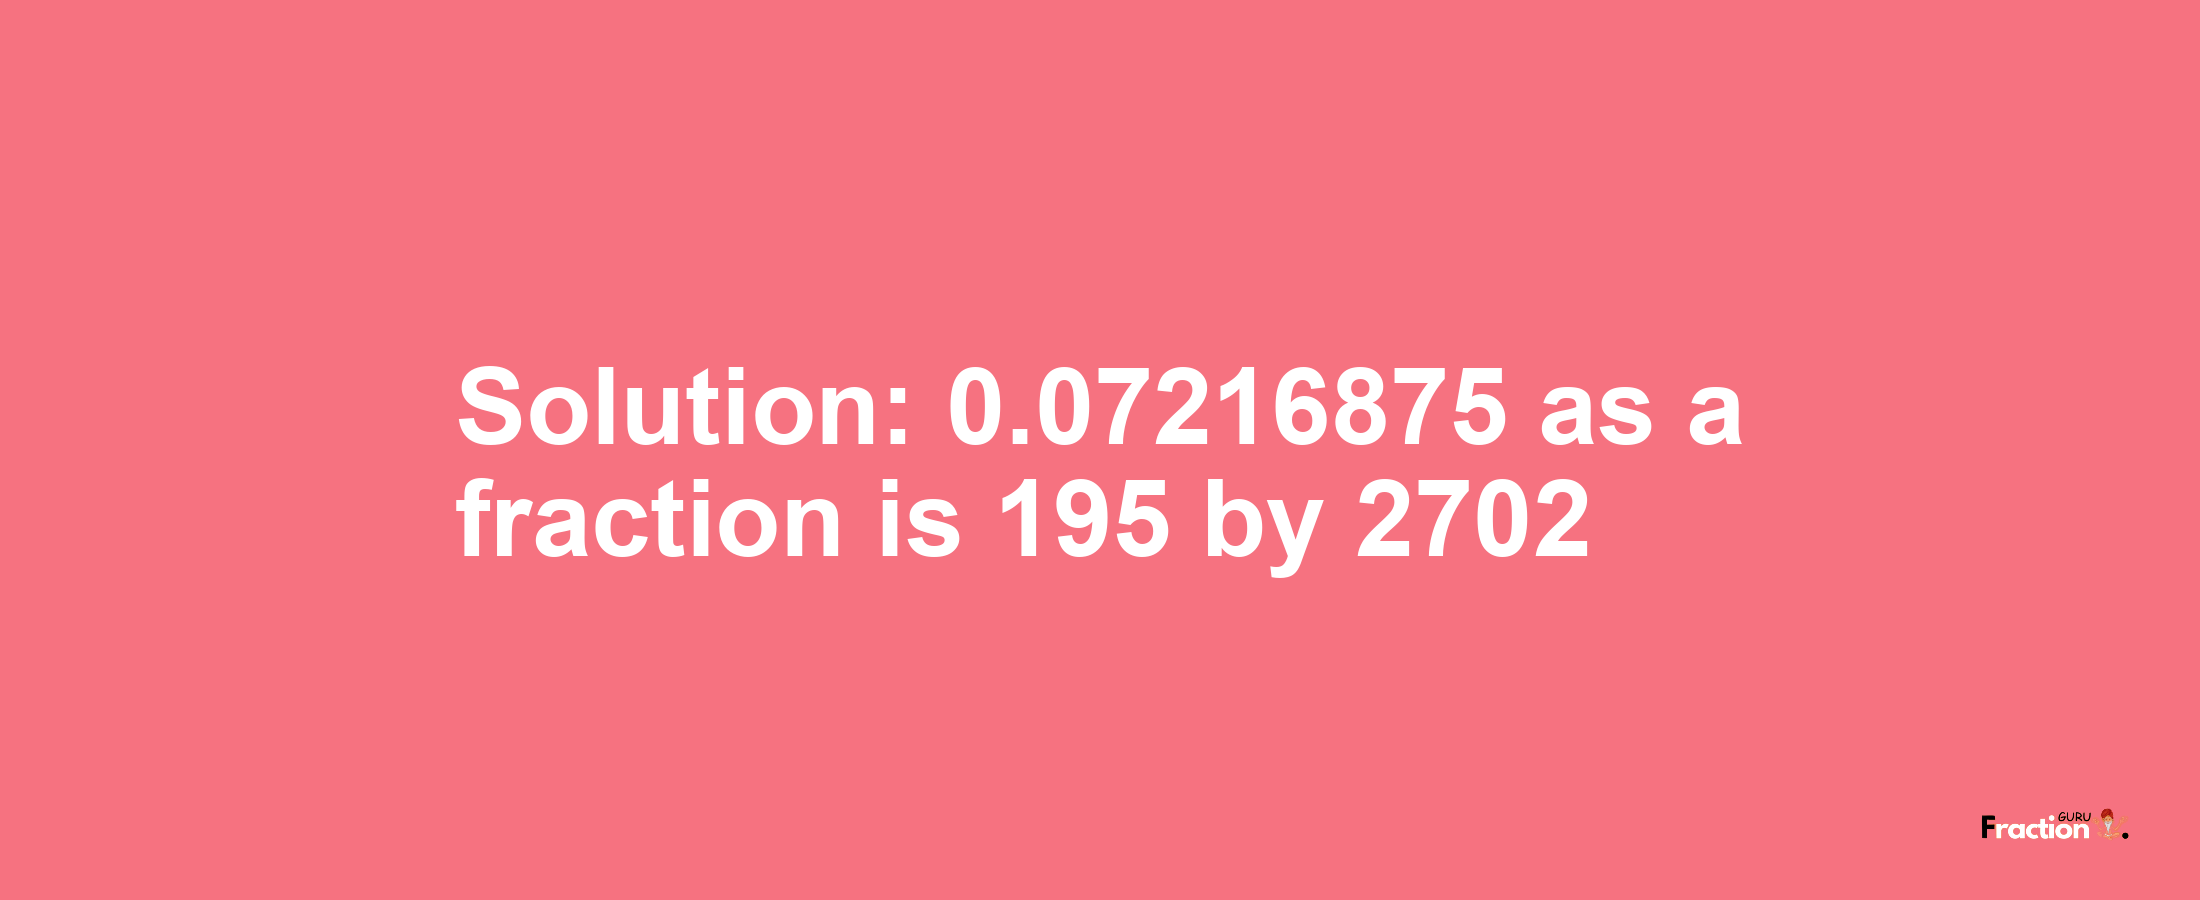 Solution:0.07216875 as a fraction is 195/2702